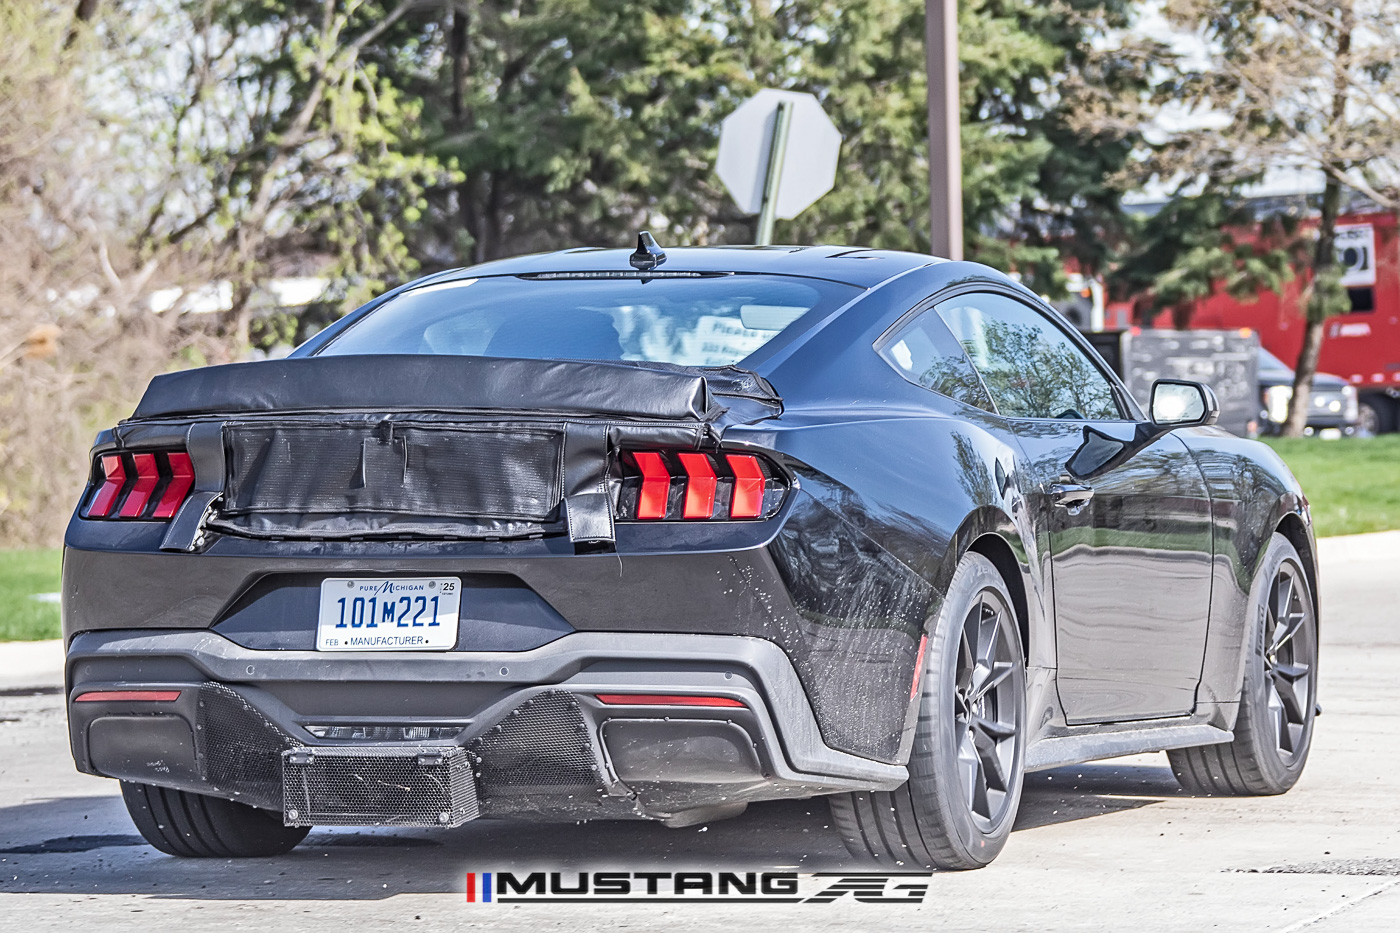 S650 Mustang 📸 Mustang GT3 Road-Version Prototype Spied Testing with Center-Exit Exhaust s650-mustang-variant-prototype-center-exit-exhaust-12